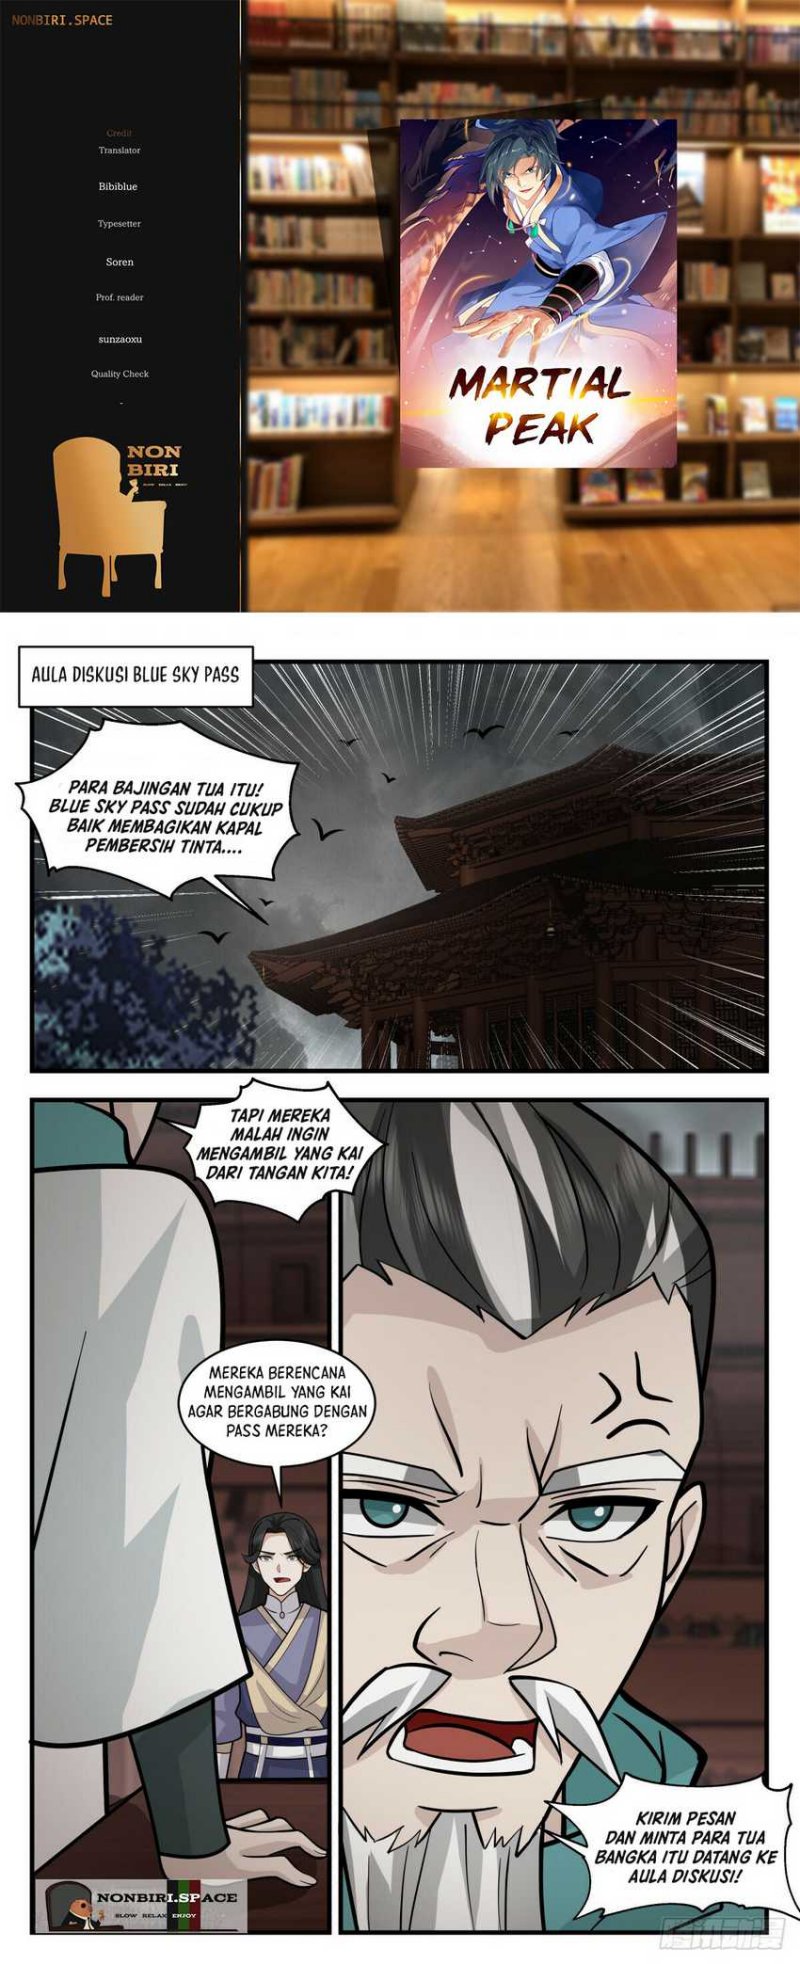 Martial Peak: Chapter 3072 - Page 1